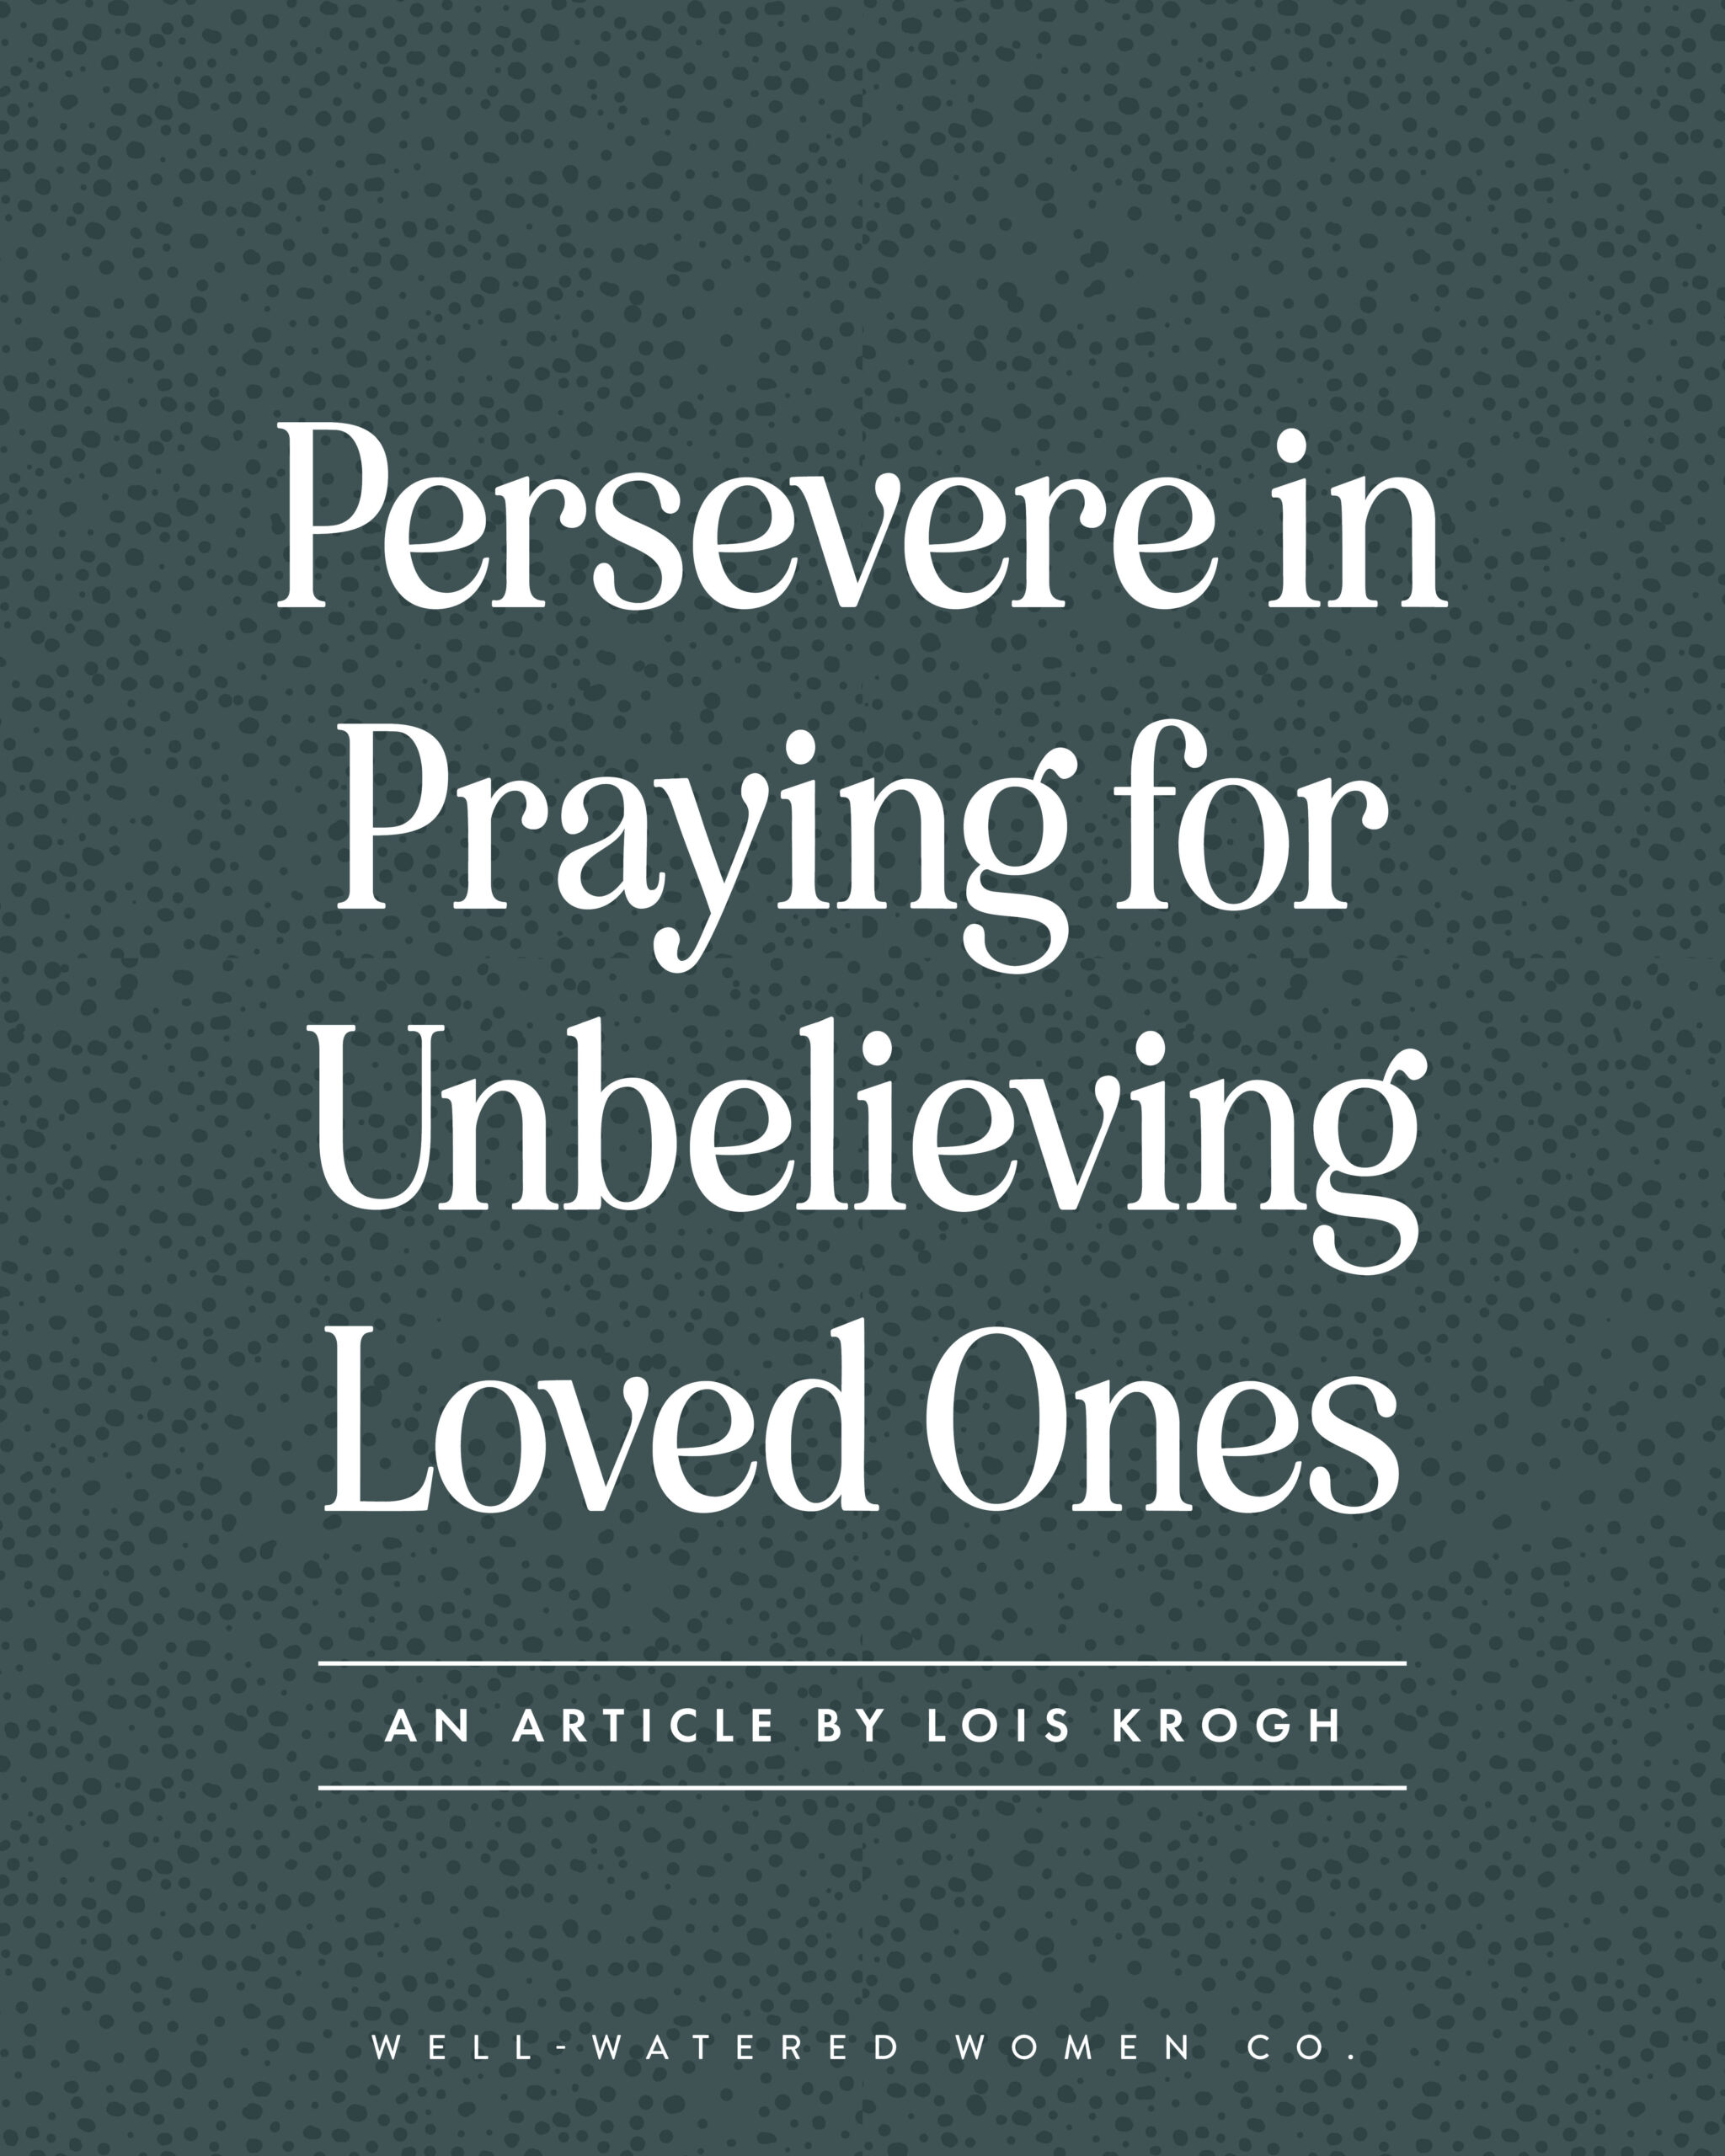 Persevere in Praying for Unbelieving Loved Ones – Well-Watered Women